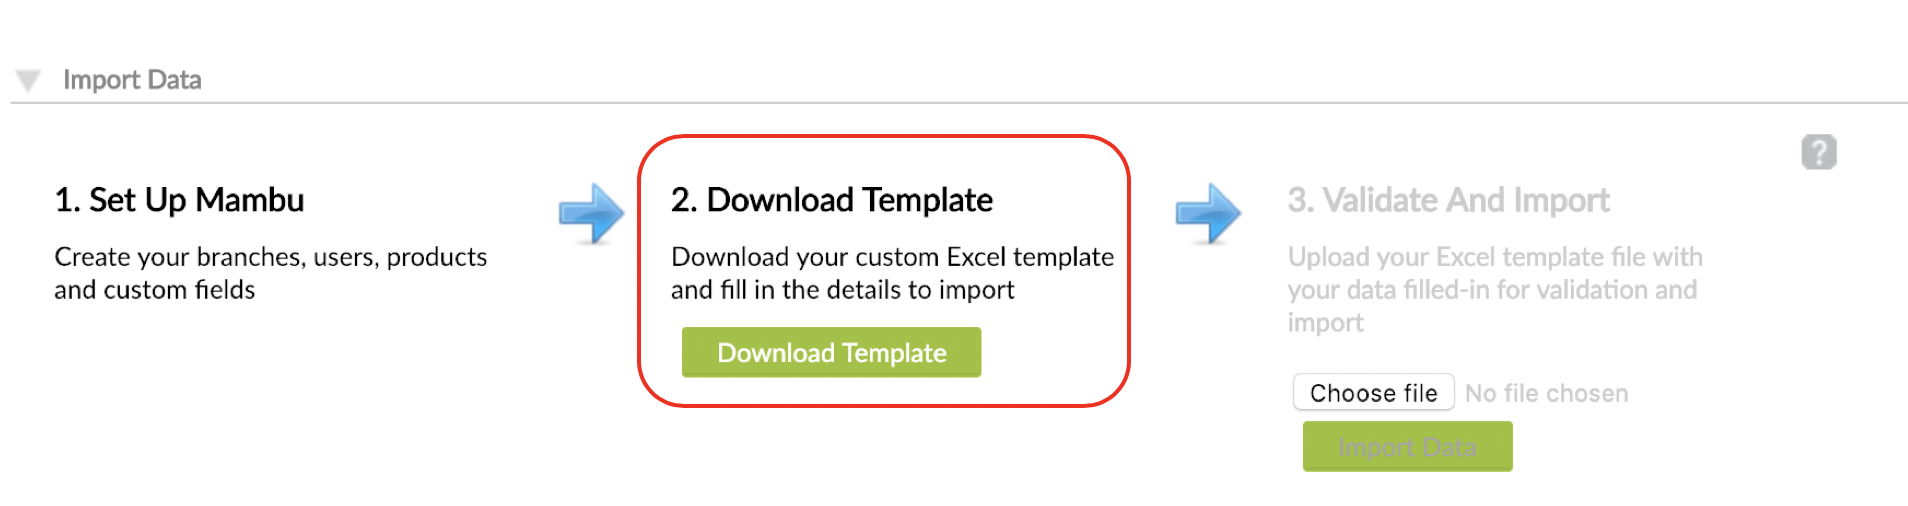 Download Template step with Download Template button